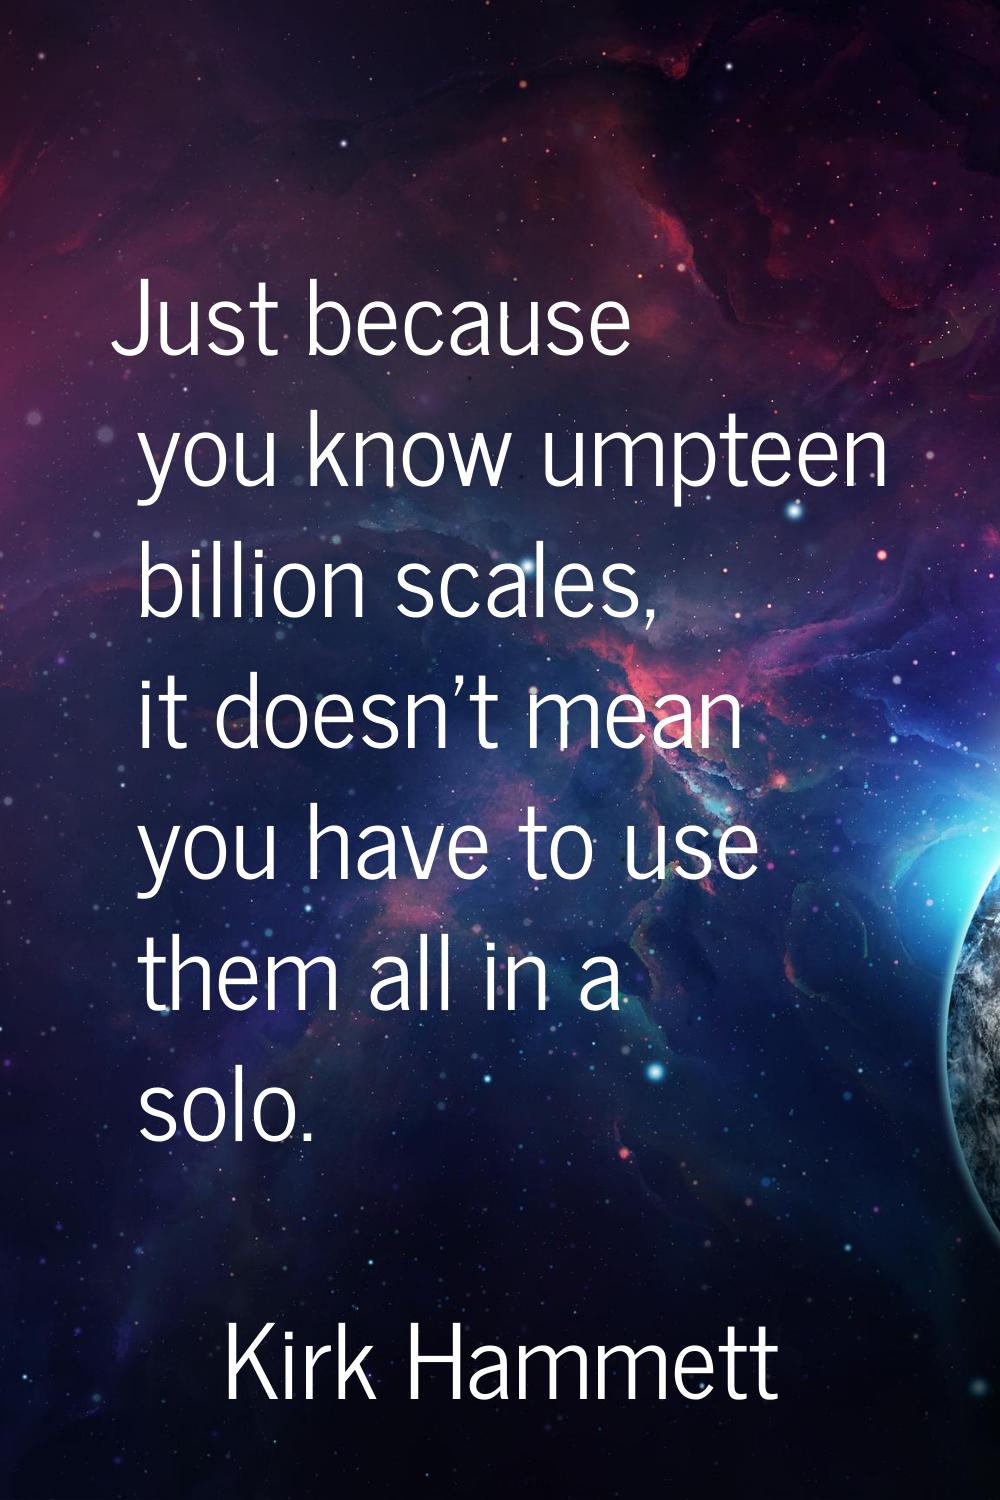 Just because you know umpteen billion scales, it doesn't mean you have to use them all in a solo.